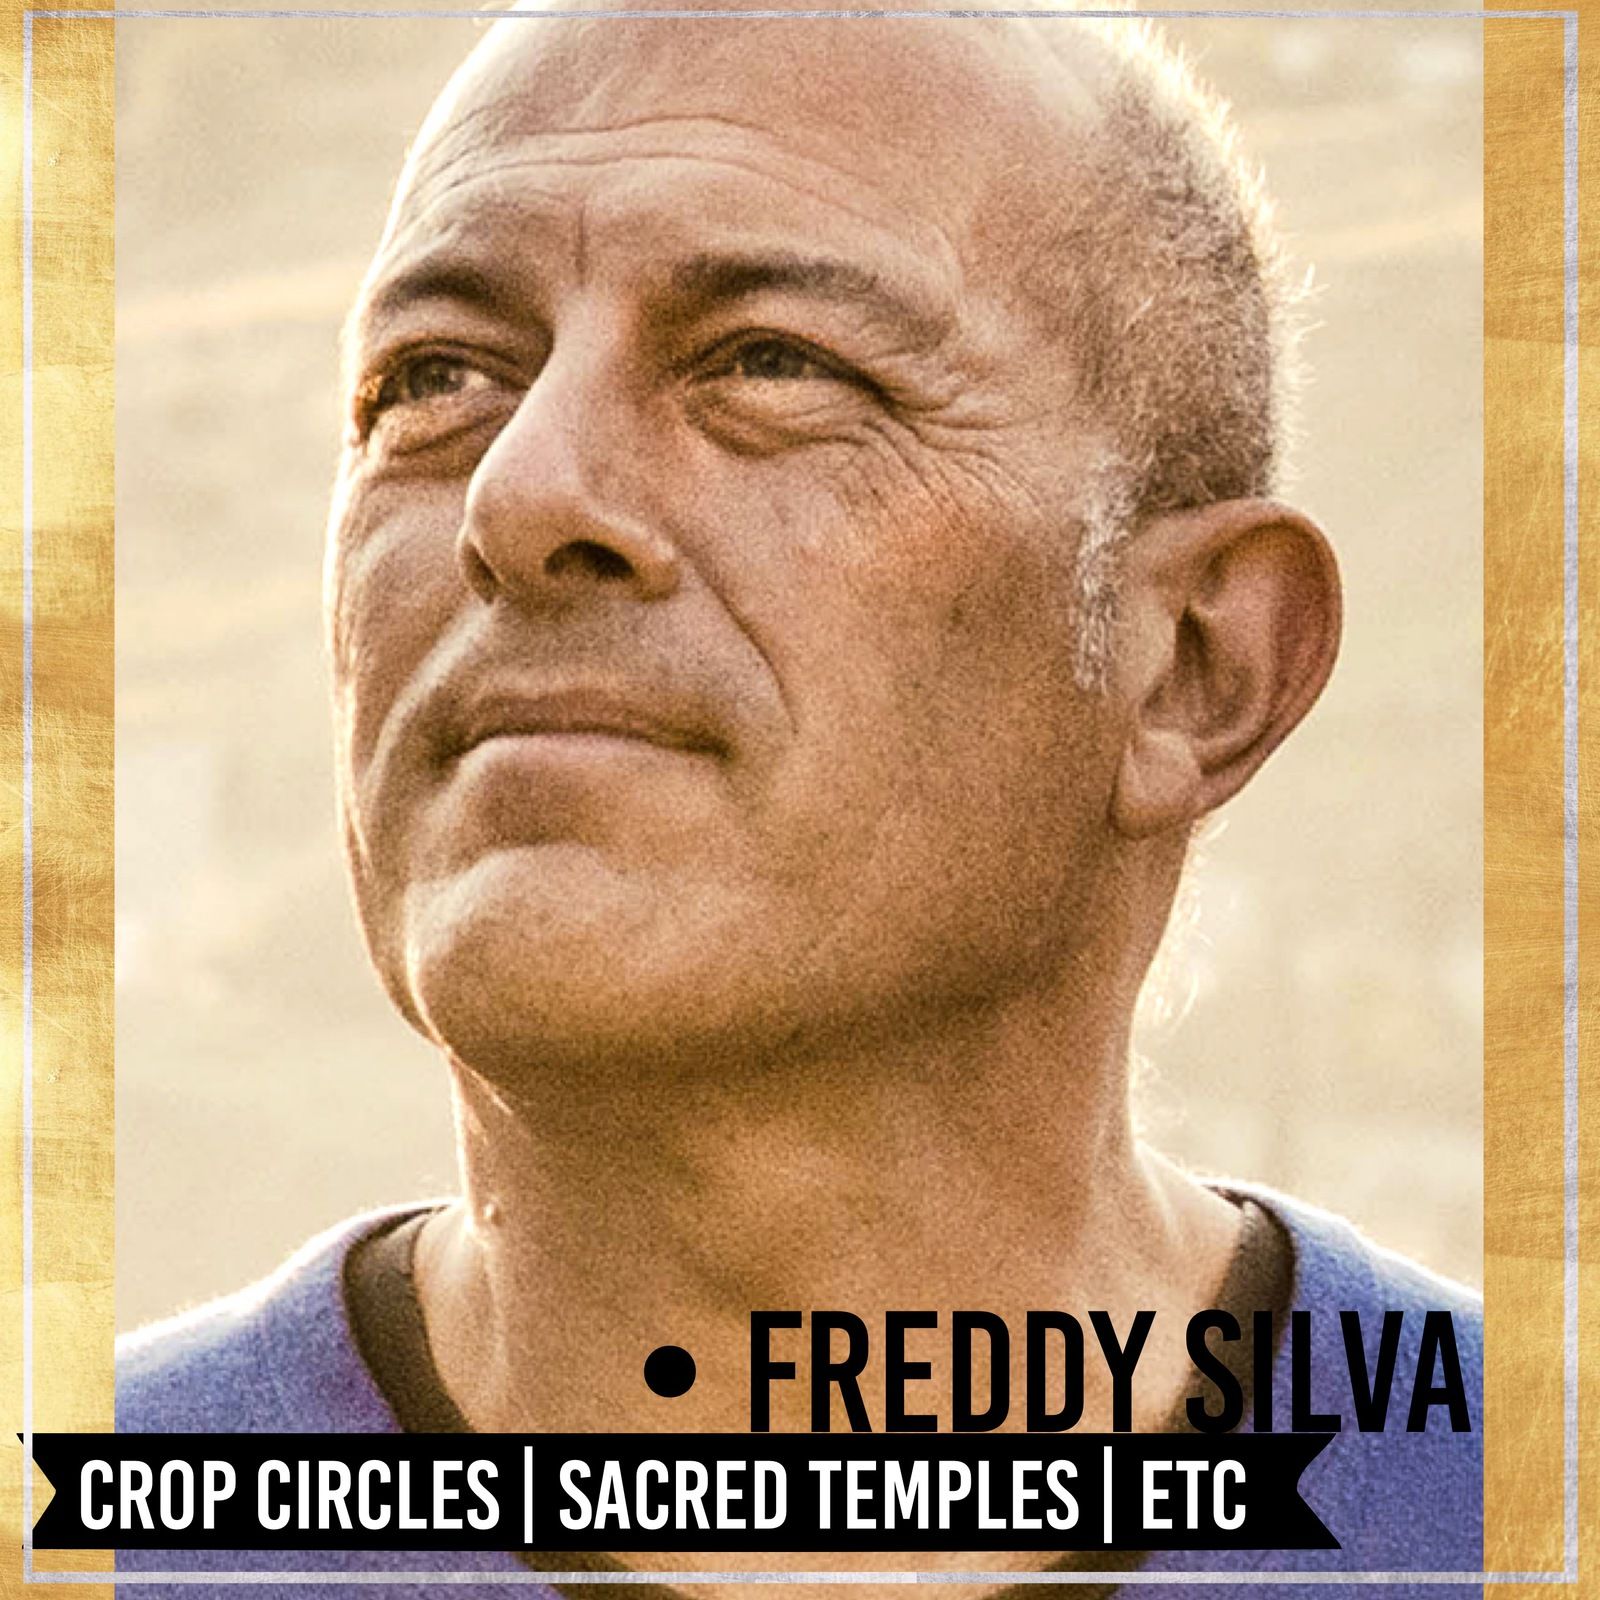 21: Episode 20 | Freddy Silva | Crop Circles / Sacred Temples / New Book